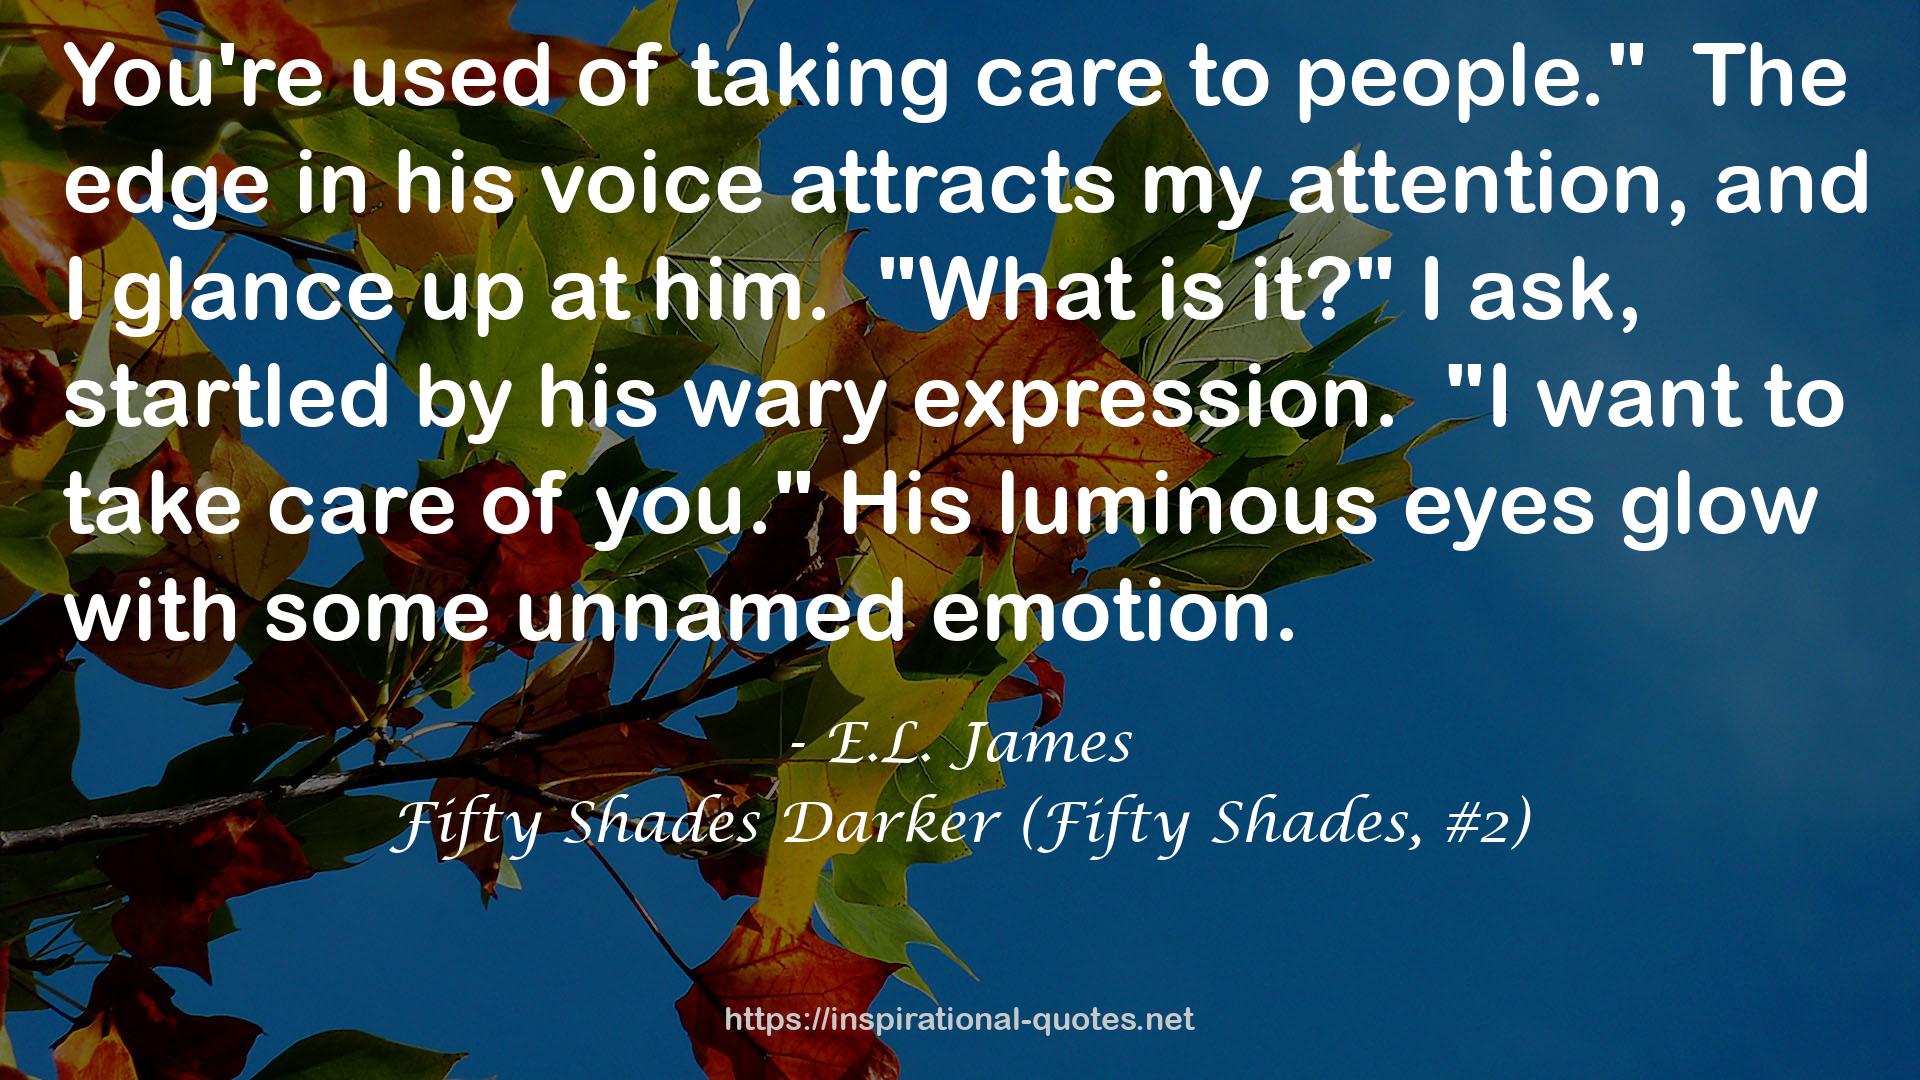 Fifty Shades Darker (Fifty Shades, #2) QUOTES